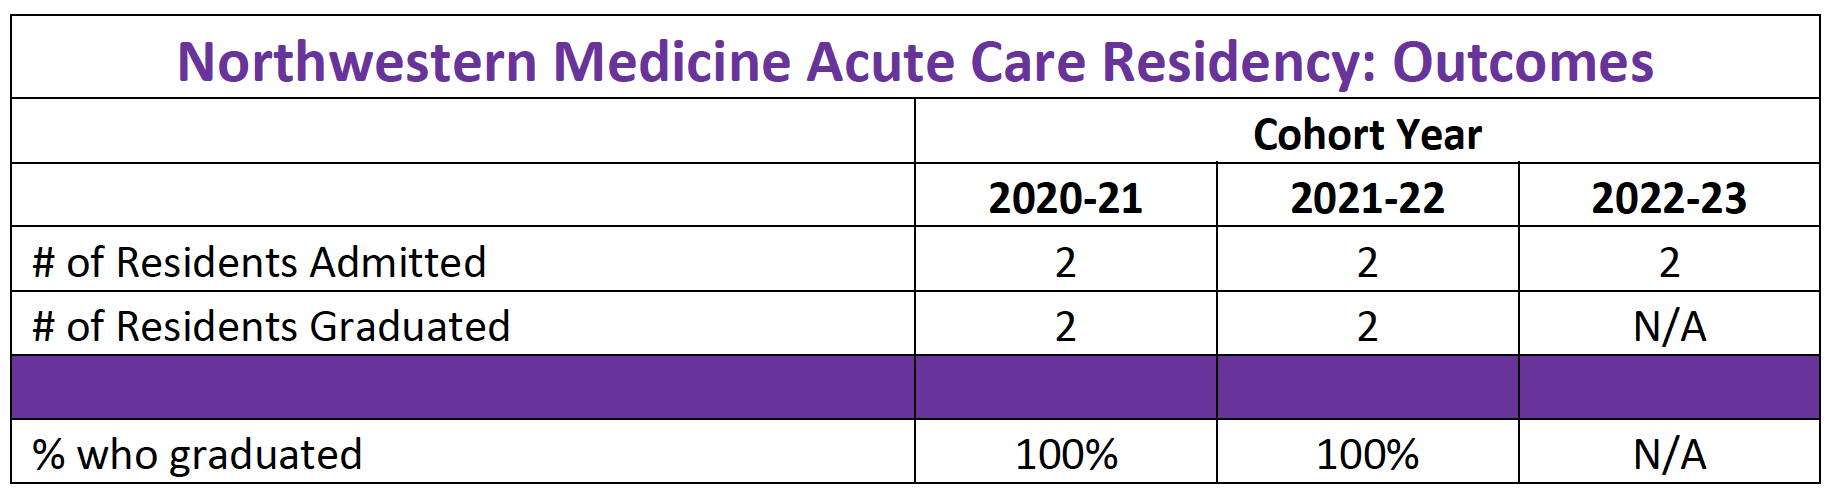 acute-care-residency-outcomes